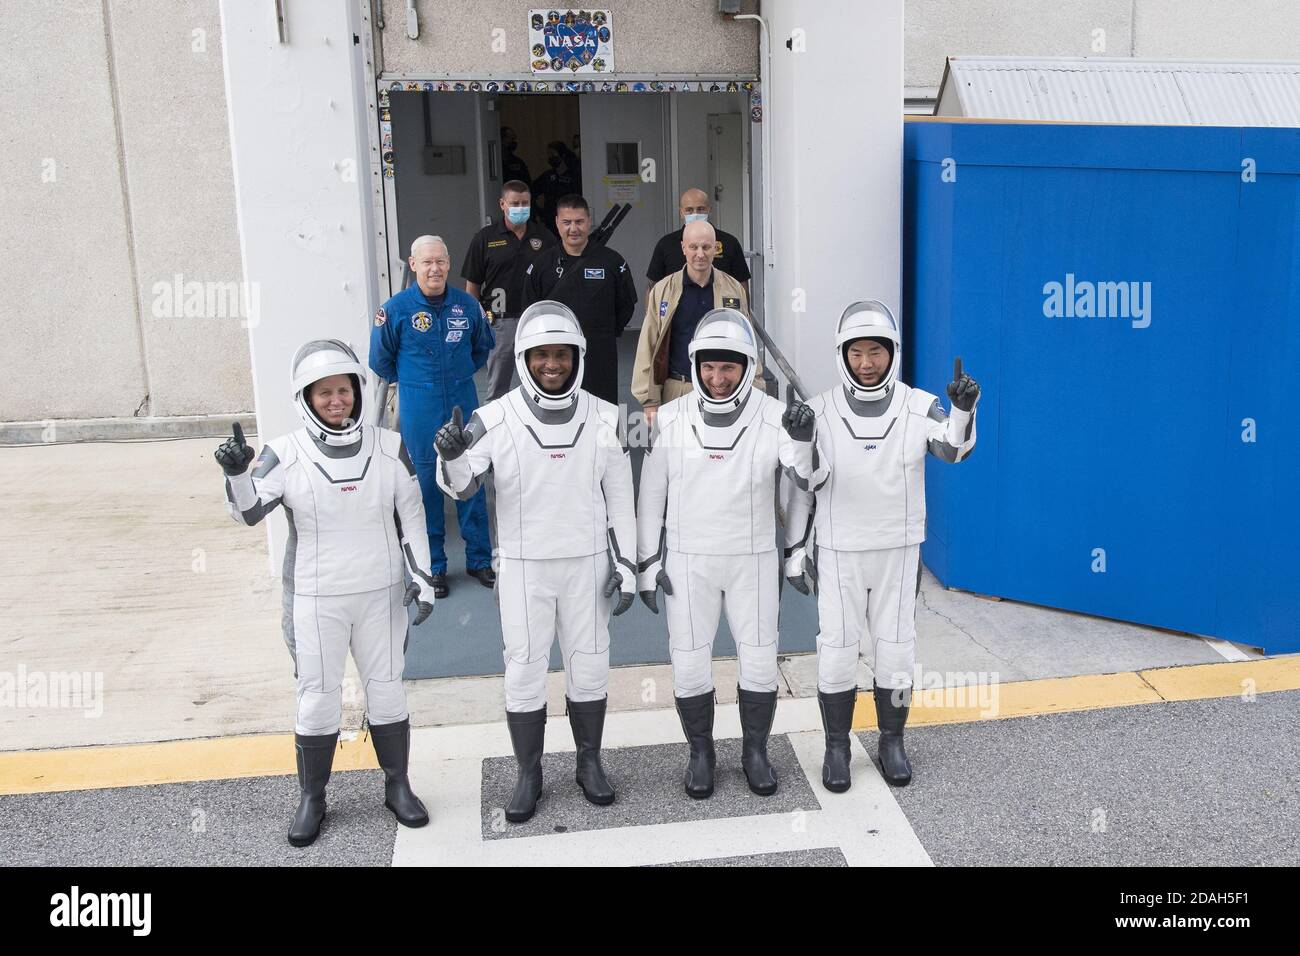 Kennedy Space Center, Florida, USA. 12th Nov 2020. NASA astronauts Shannon Walker, left, Victor Glover, second from left, Mike Hopkins, second from right, and Japan Aerospace Exploration Agency (JAXA) astronaut Soichi Noguchi, right, wearing SpaceX spacesuits, stop to pose for a picture as walk out of the Neil A. Armstrong Operations and Checkout Building to depart for Launch Complex 39A during a dress rehearsal prior to the Crew-1 mission launch, on November 12, 2020, at NASA's Kennedy Space Center in Florida. Credit: UPI/Alamy Live News Stock Photo